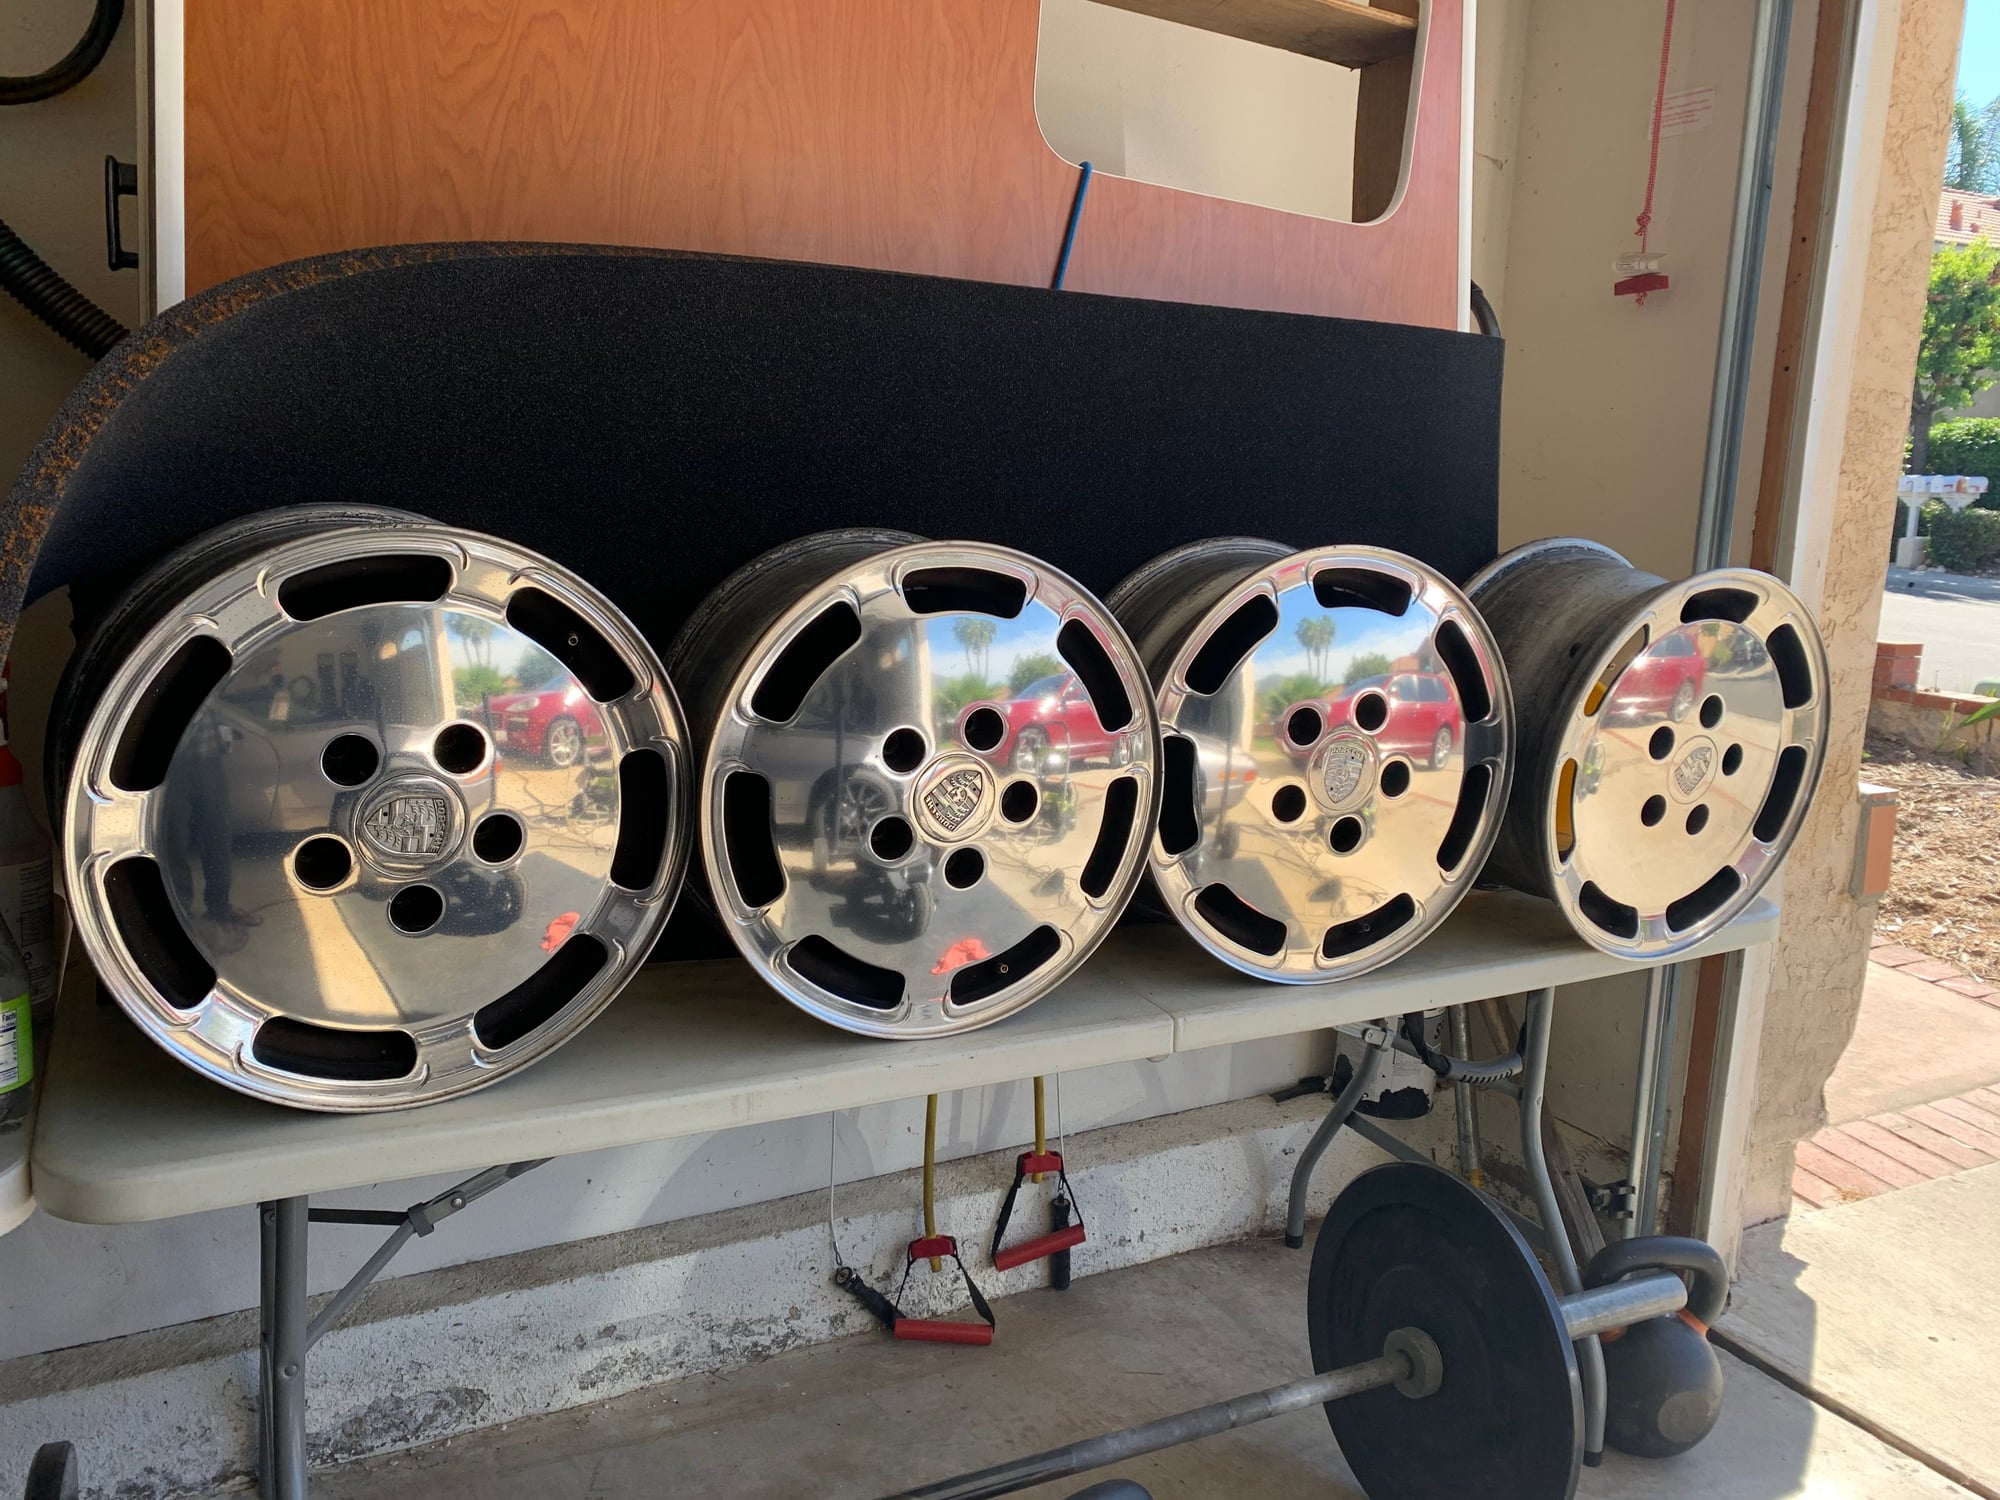 Wheels and Tires/Axles - FS: Porsche 928 S4 factory Wheels set great condition - Used - 1986 to 1995 Porsche 928 - San Diego, CA 92129, United States